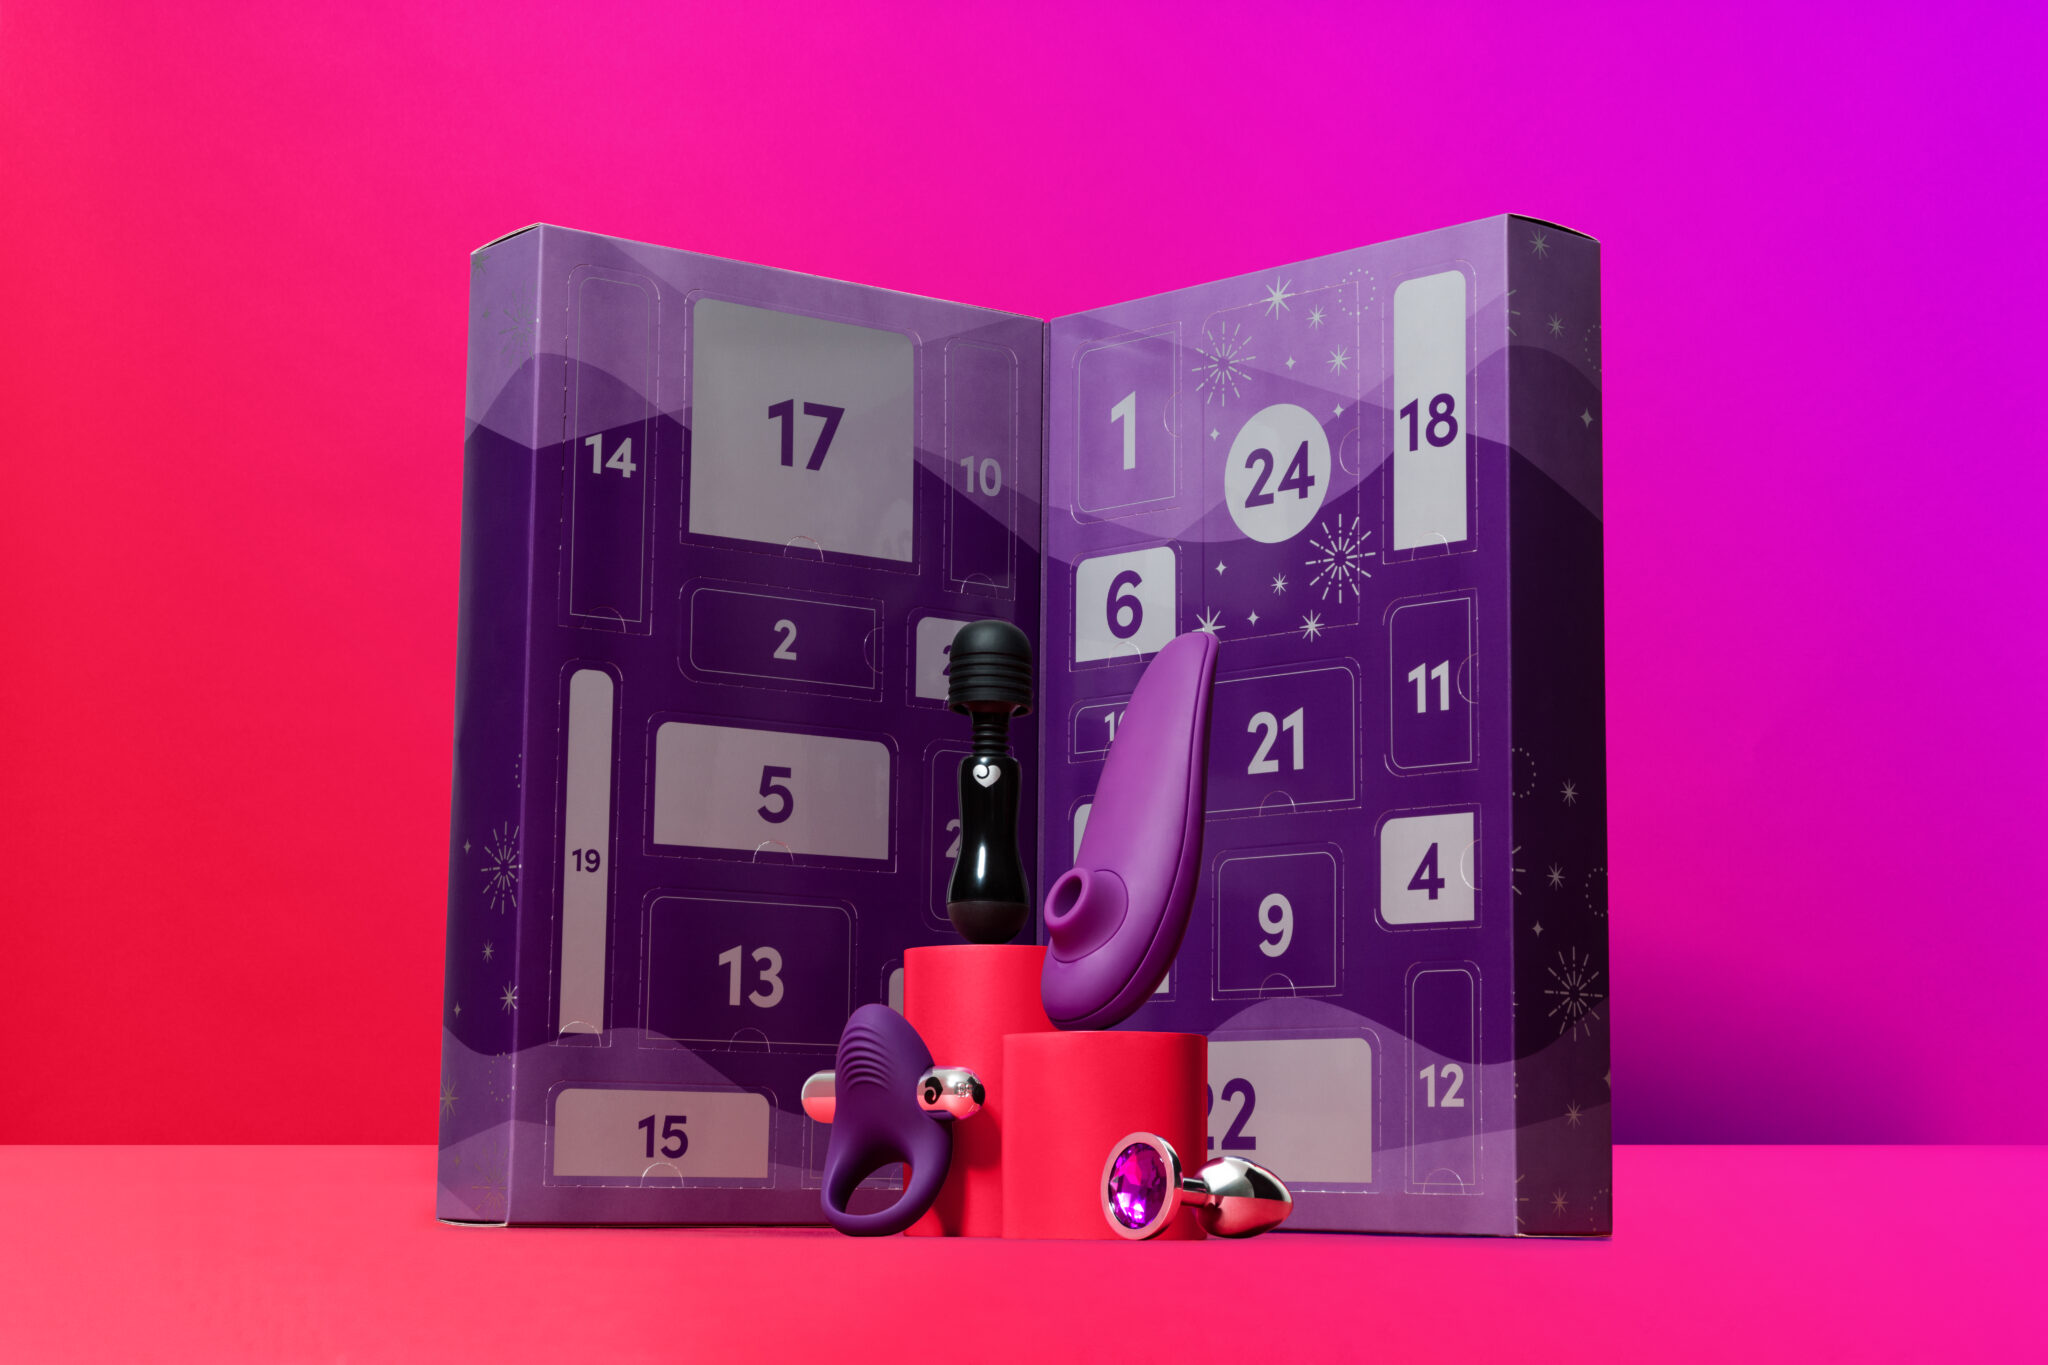 An image of the bullet vibrator, jeweled butt plug, and cock ring included in the advent calendar.